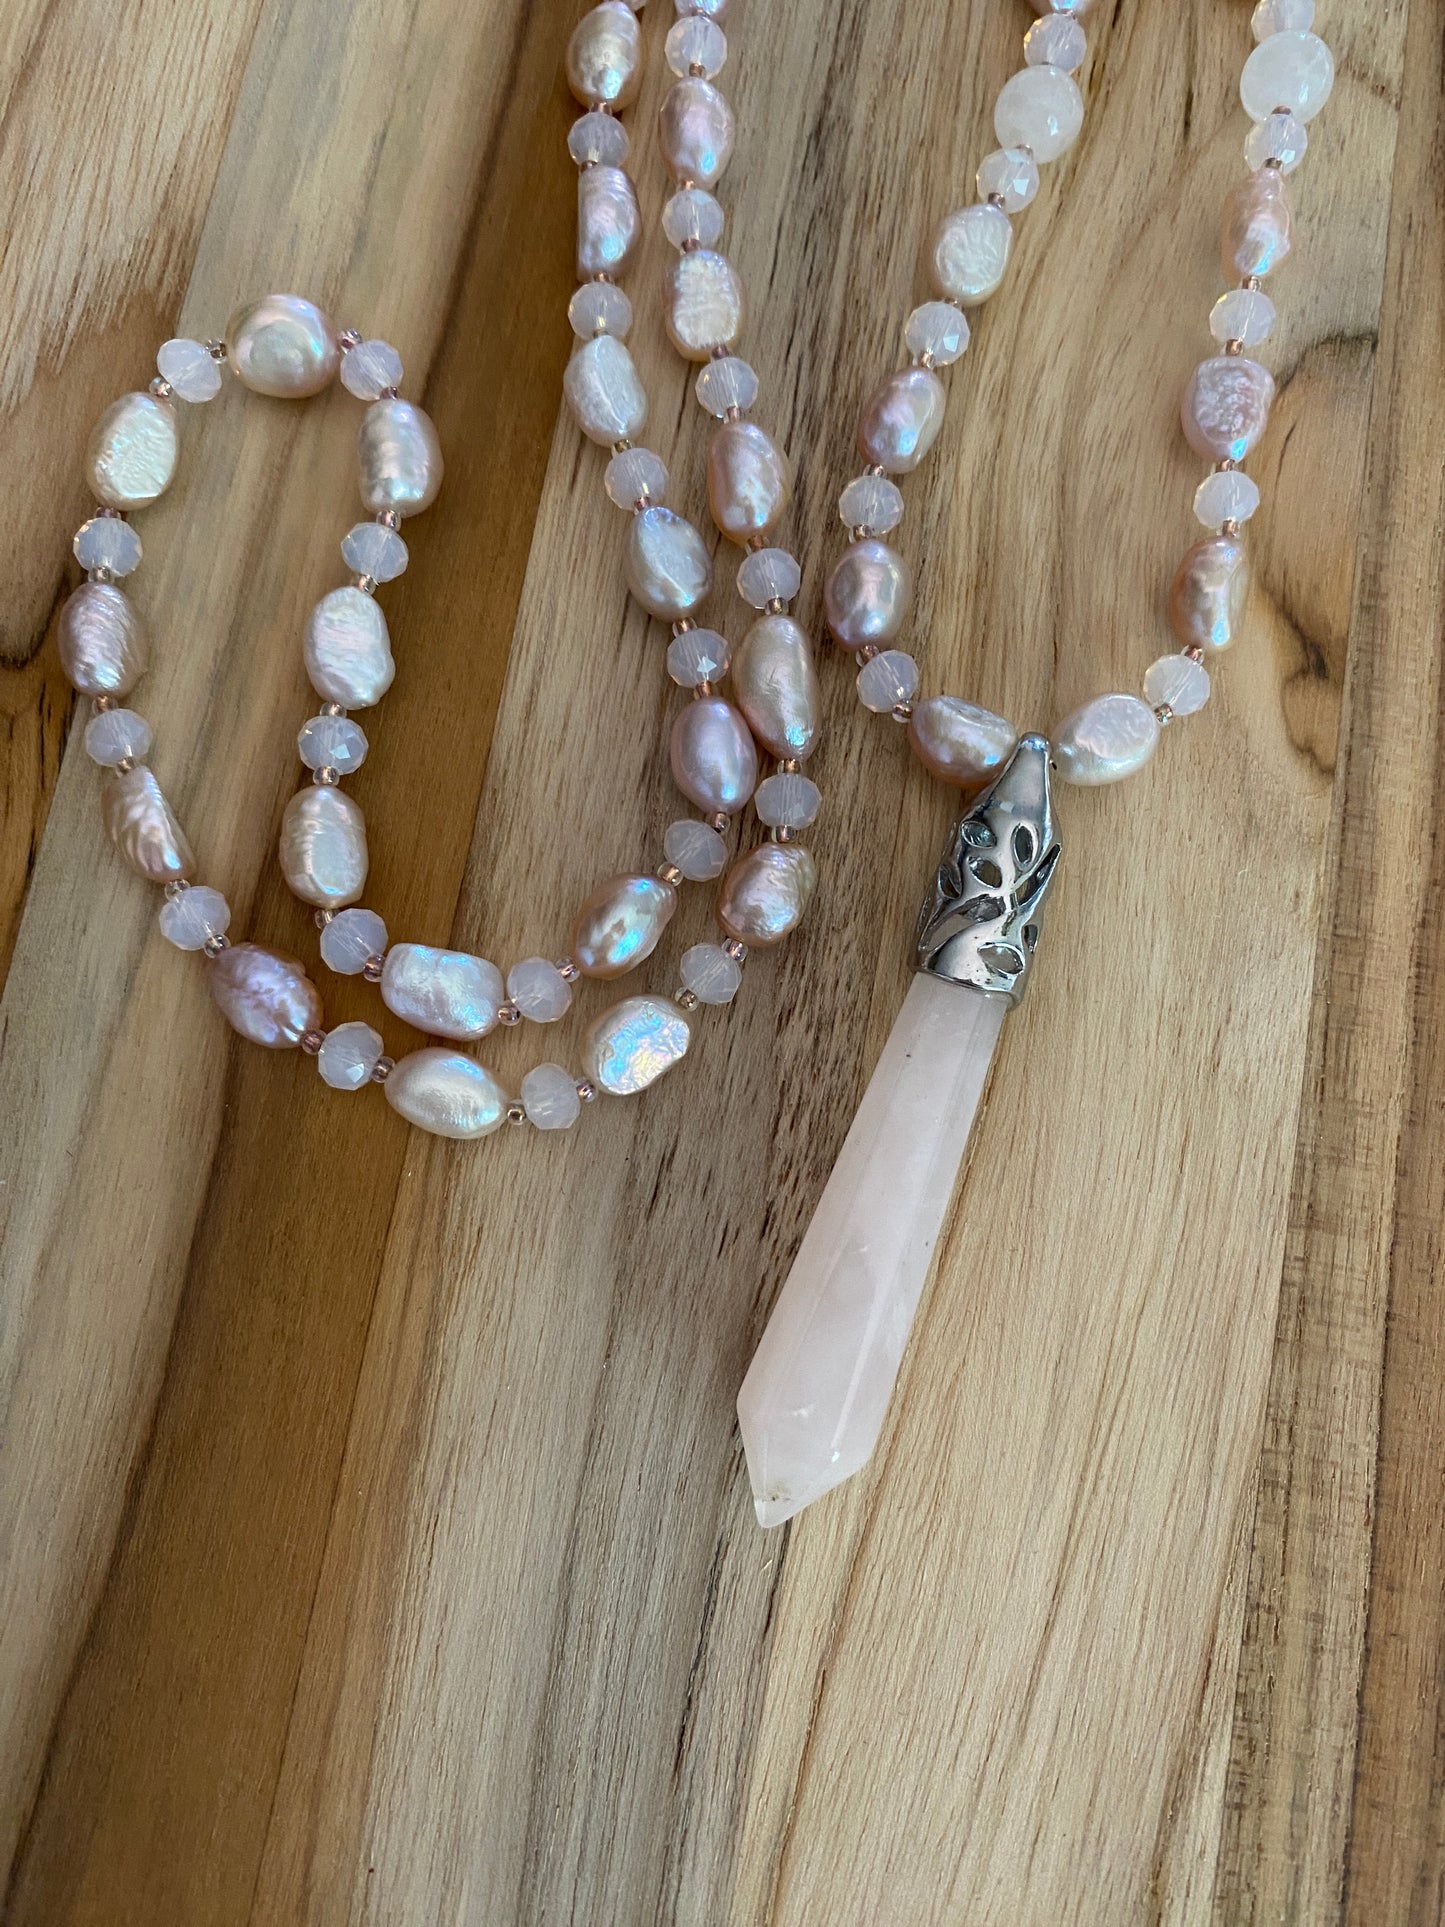 28" Long Rose Quartz Pendulum Necklace with Pearl & Crystal Beads